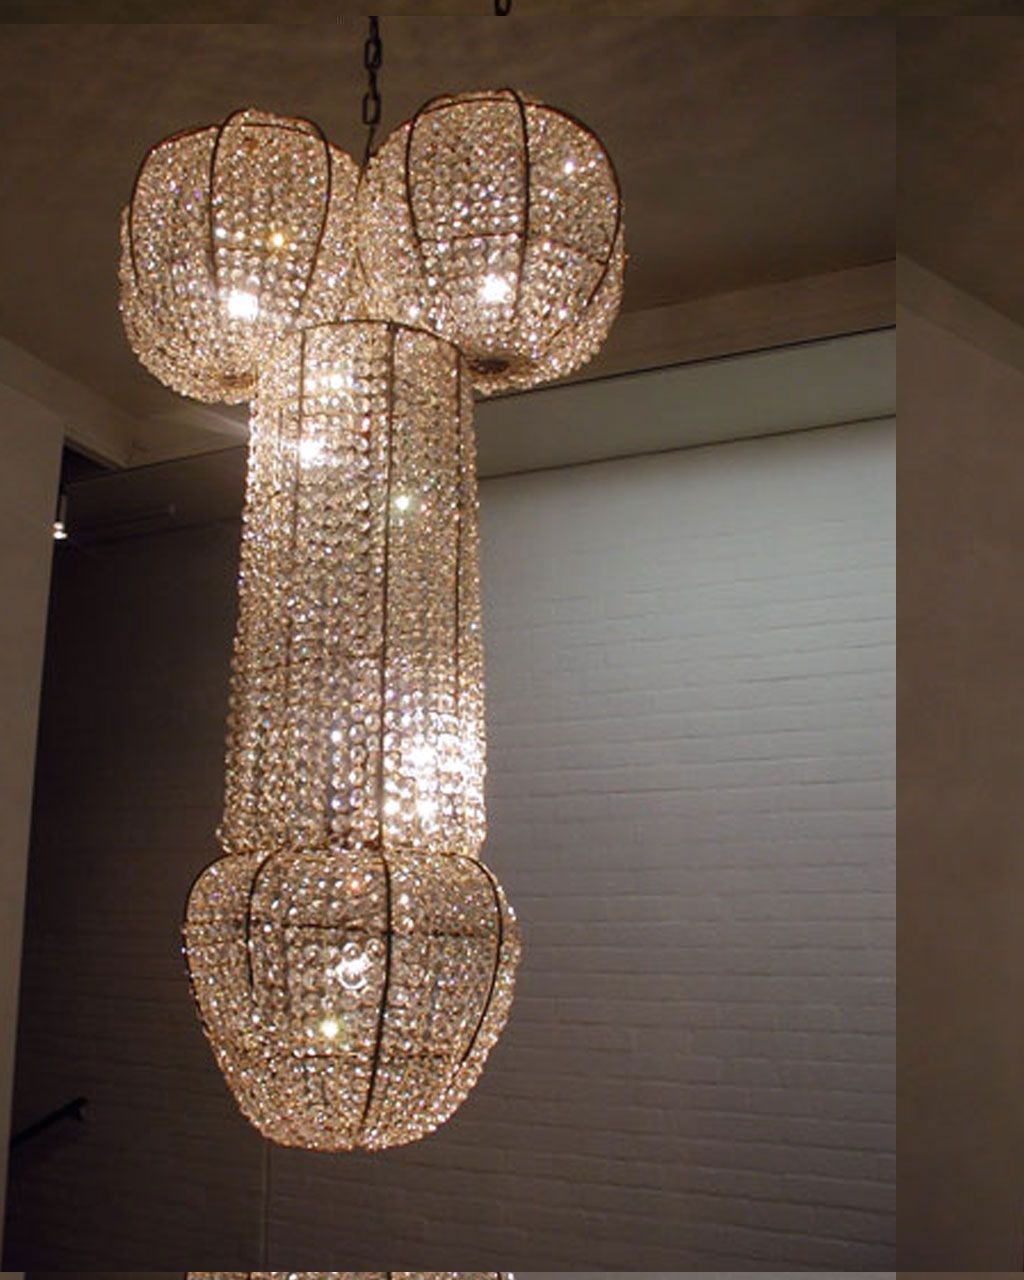 12 Ideas Of Large Contemporary Chandeliers